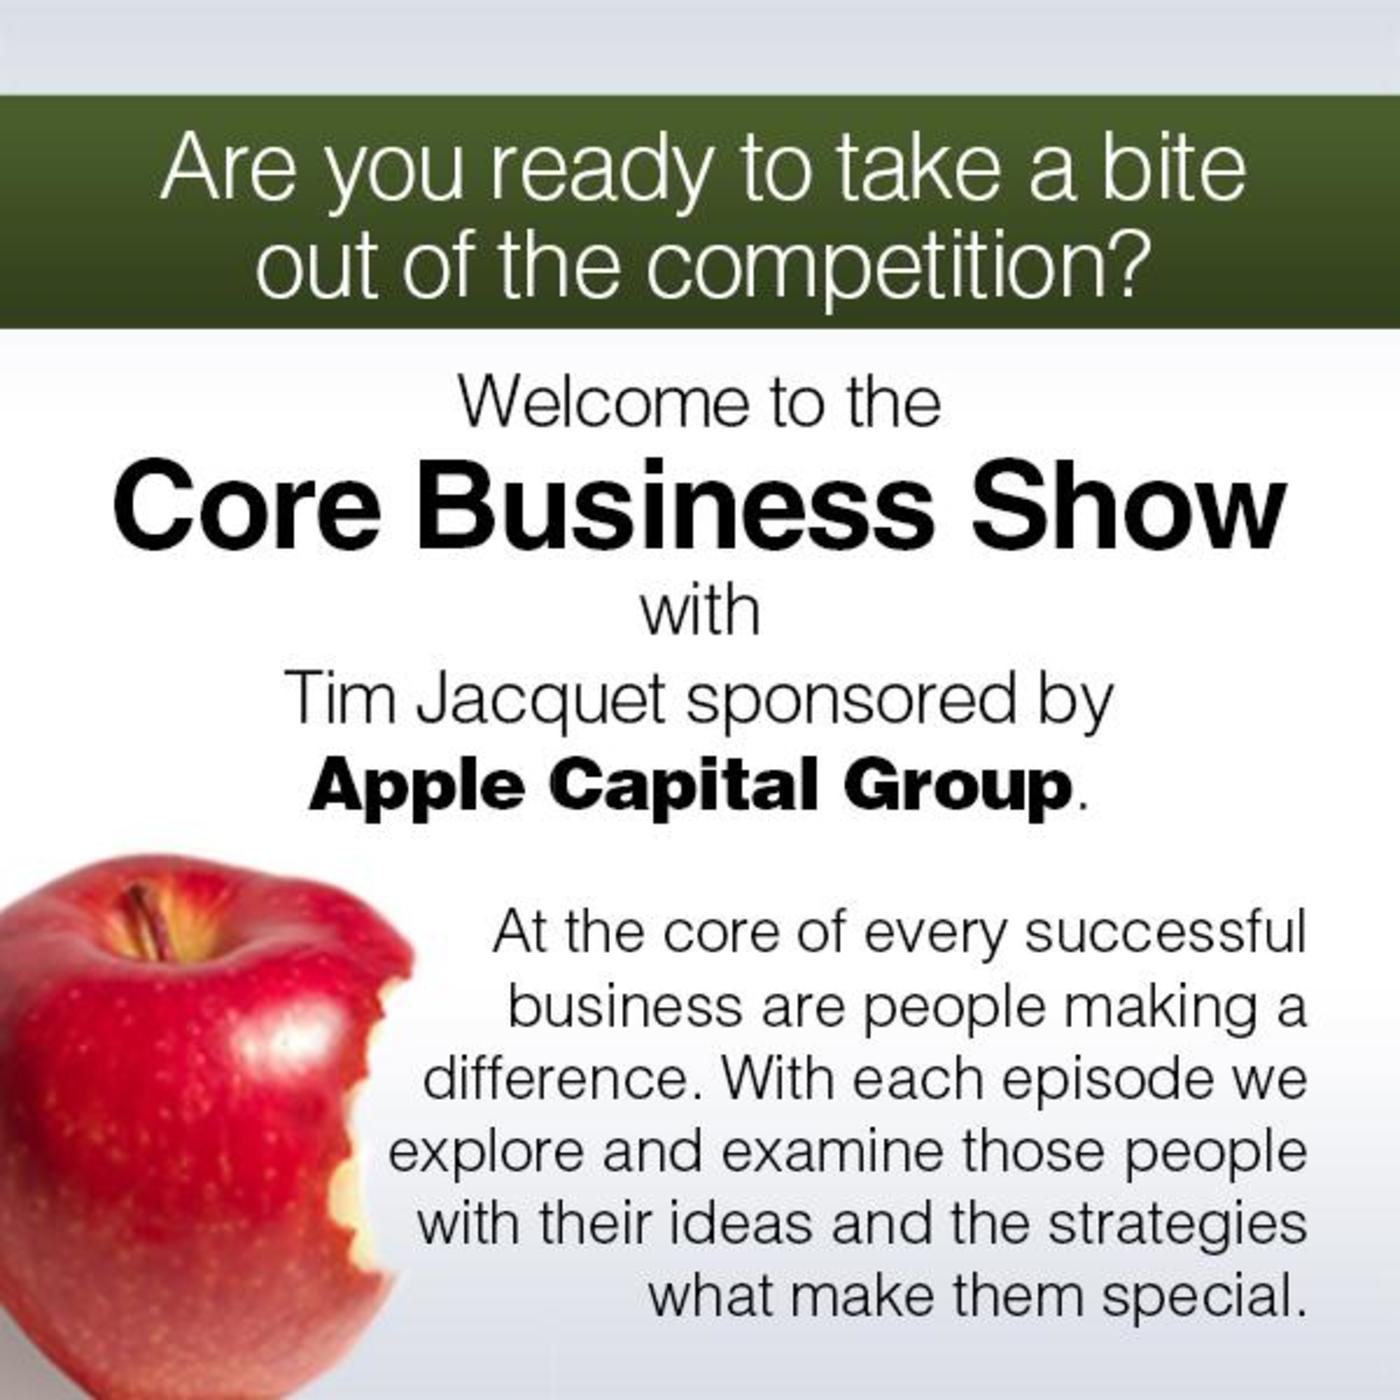 The Core Business Show